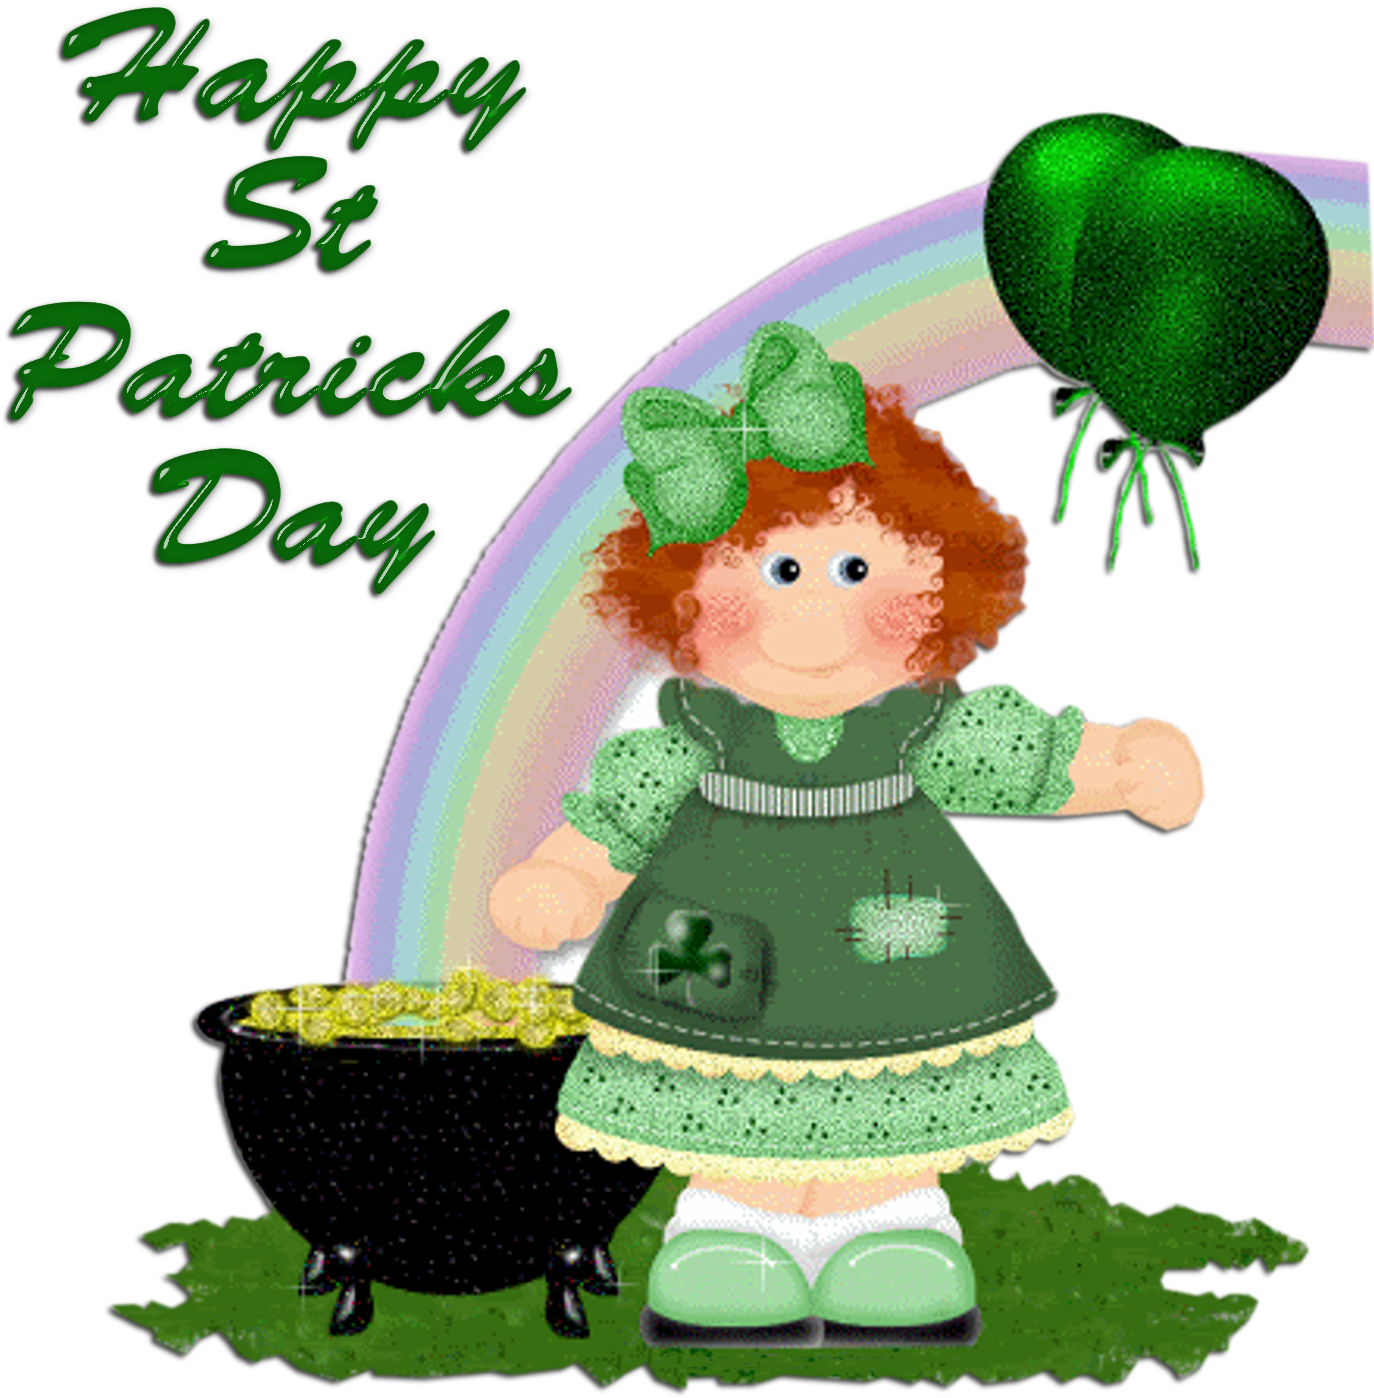 A Cartoon Of A Girl In Green Dress And A Pot Of Gold